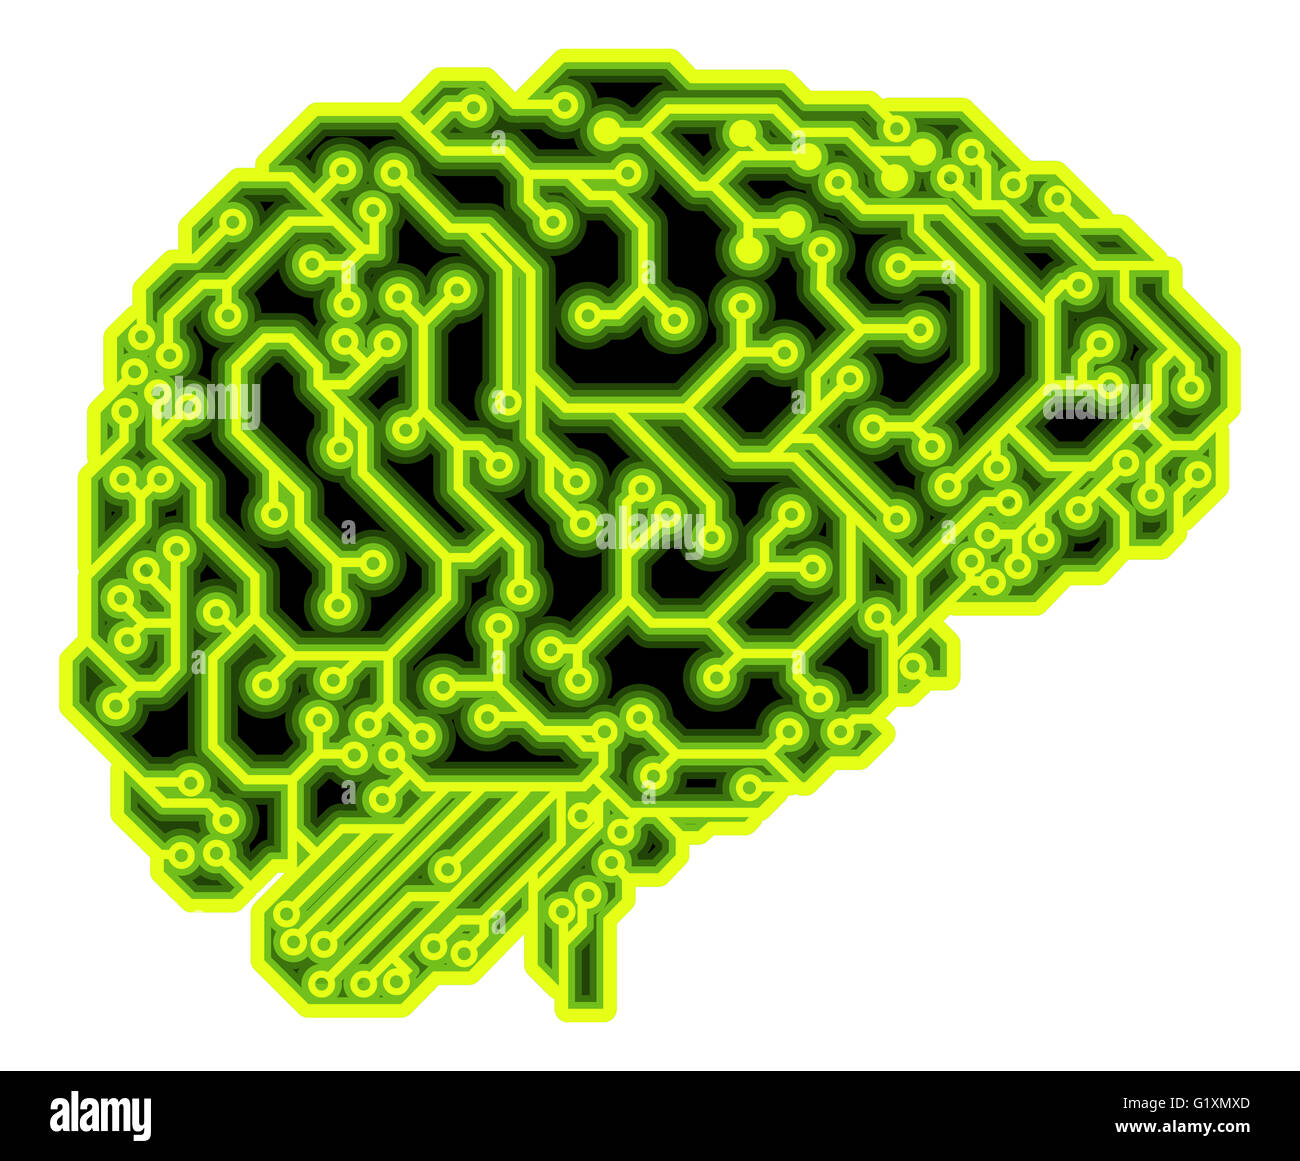 A human brain made up of electrical circuits or a circuit board, could be a concept for artificial intelligence. Stock Photo